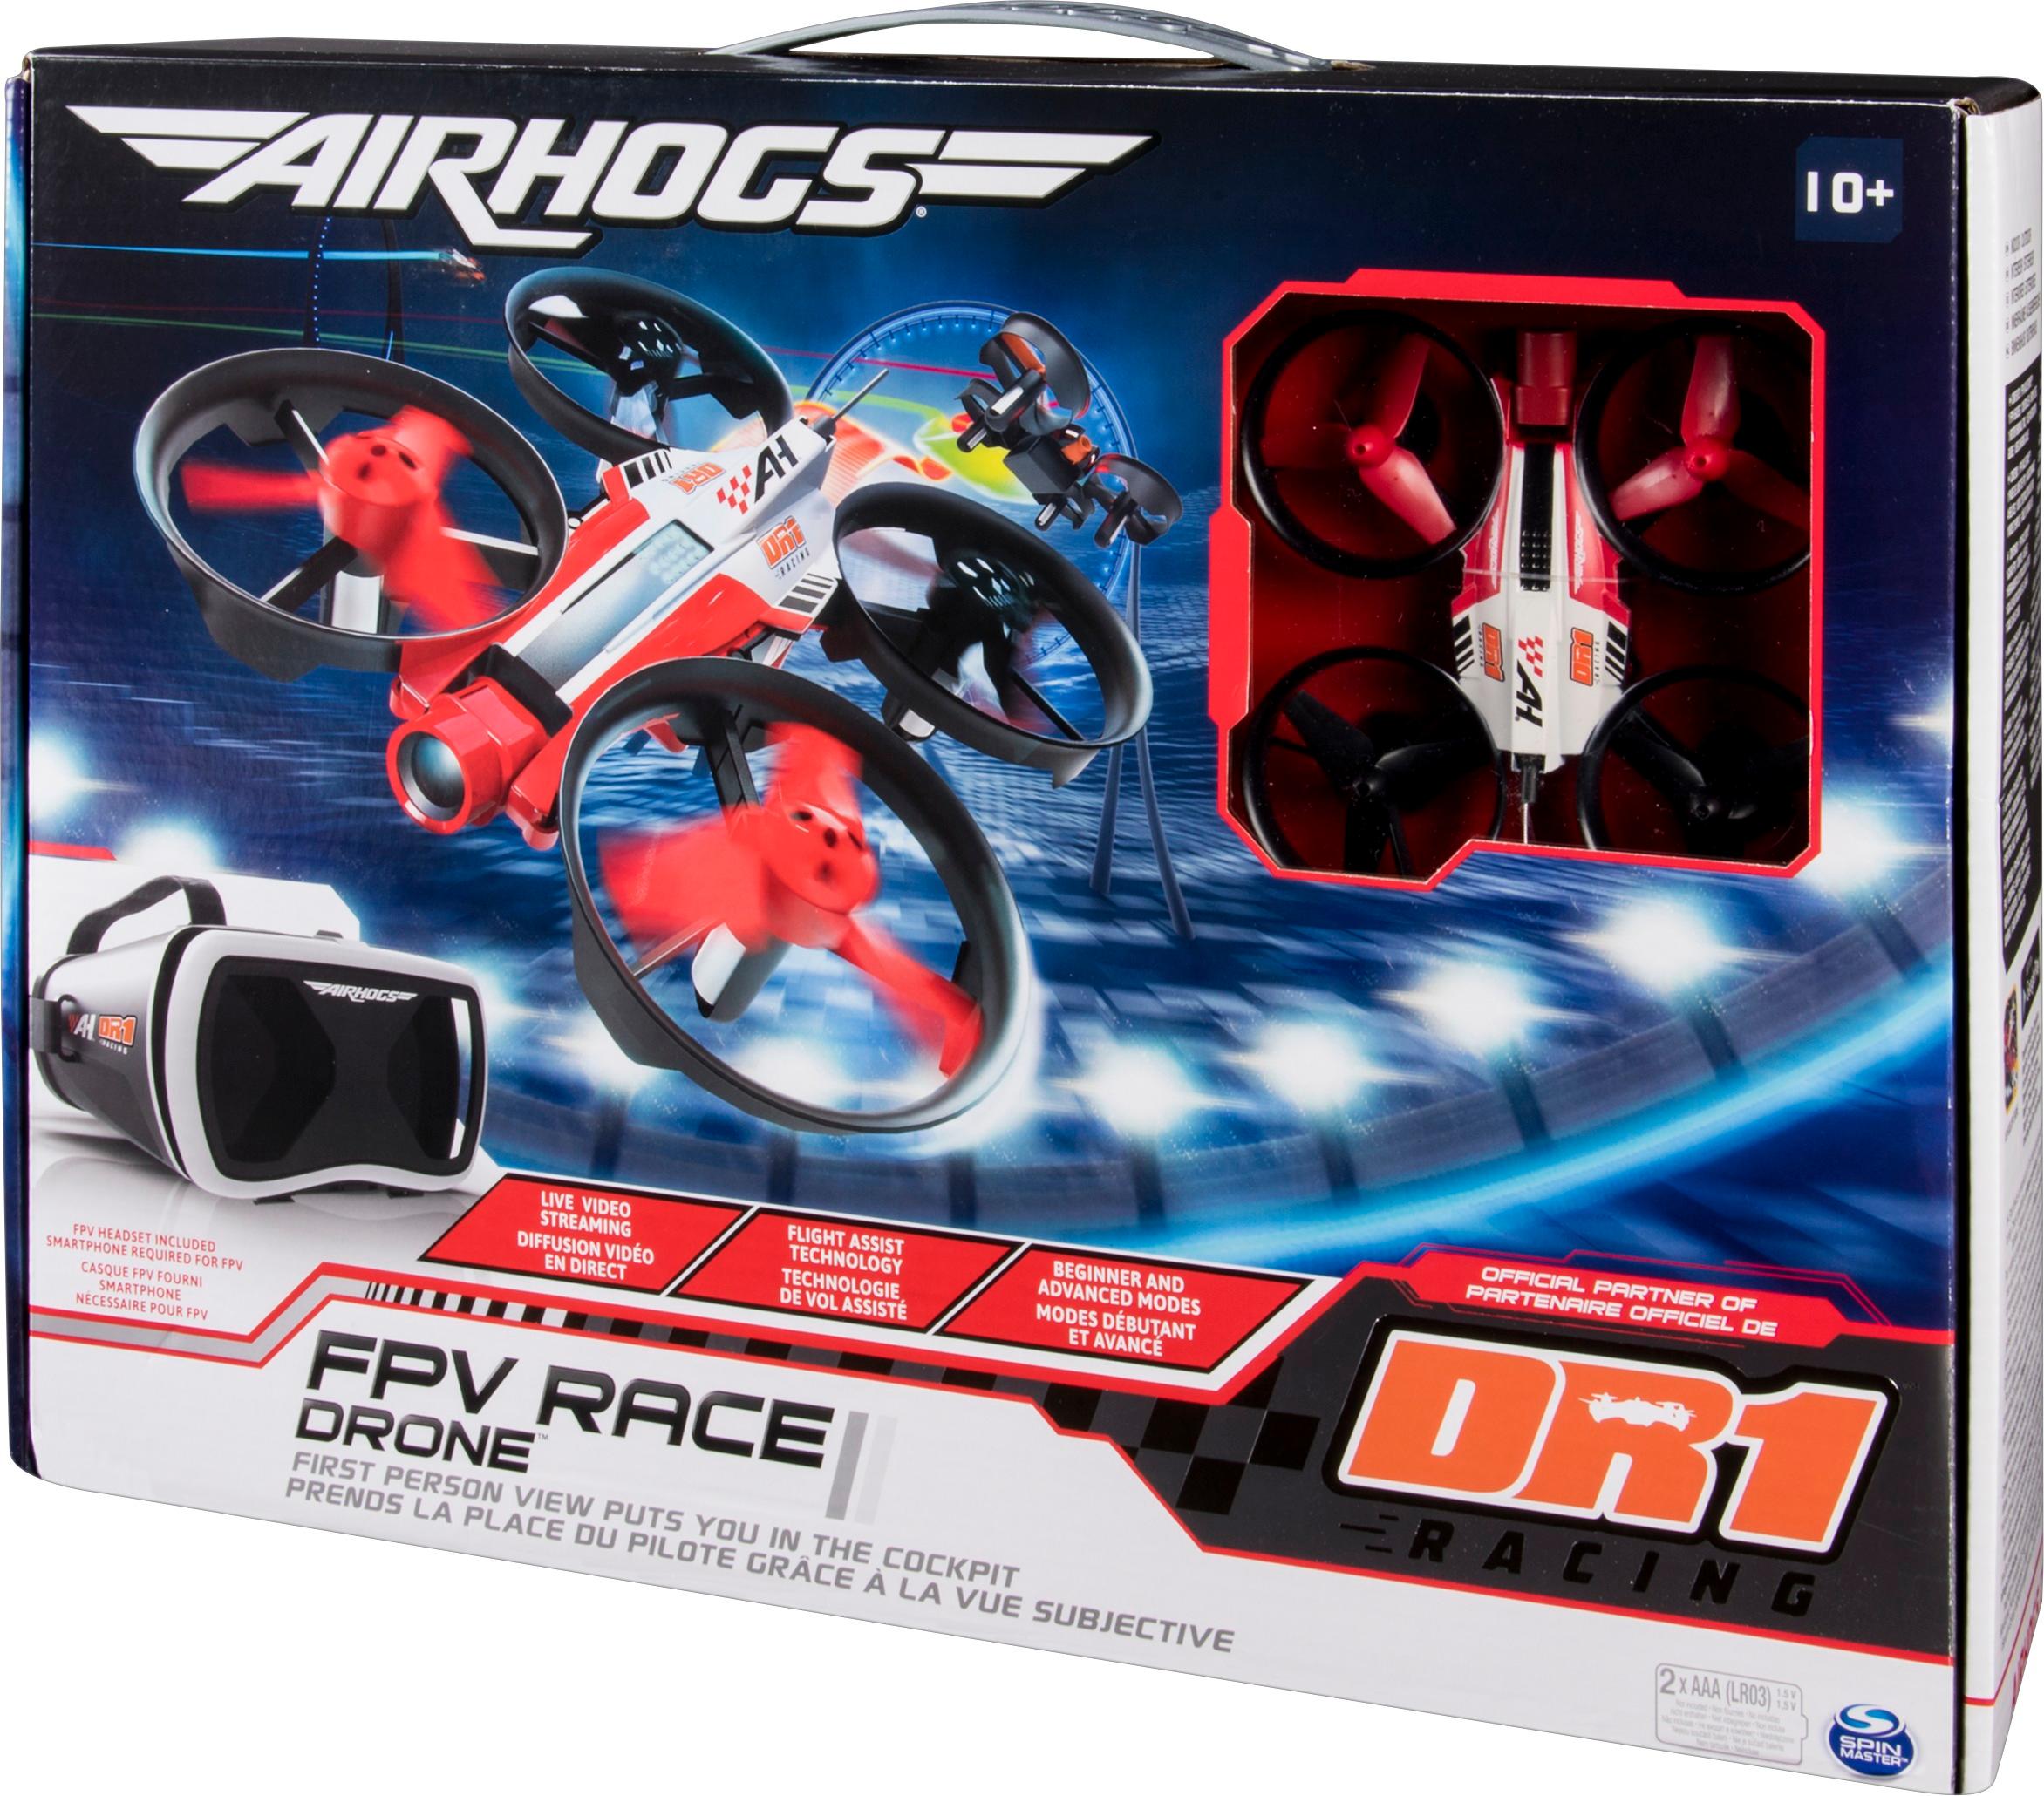 air hogs spin master drone